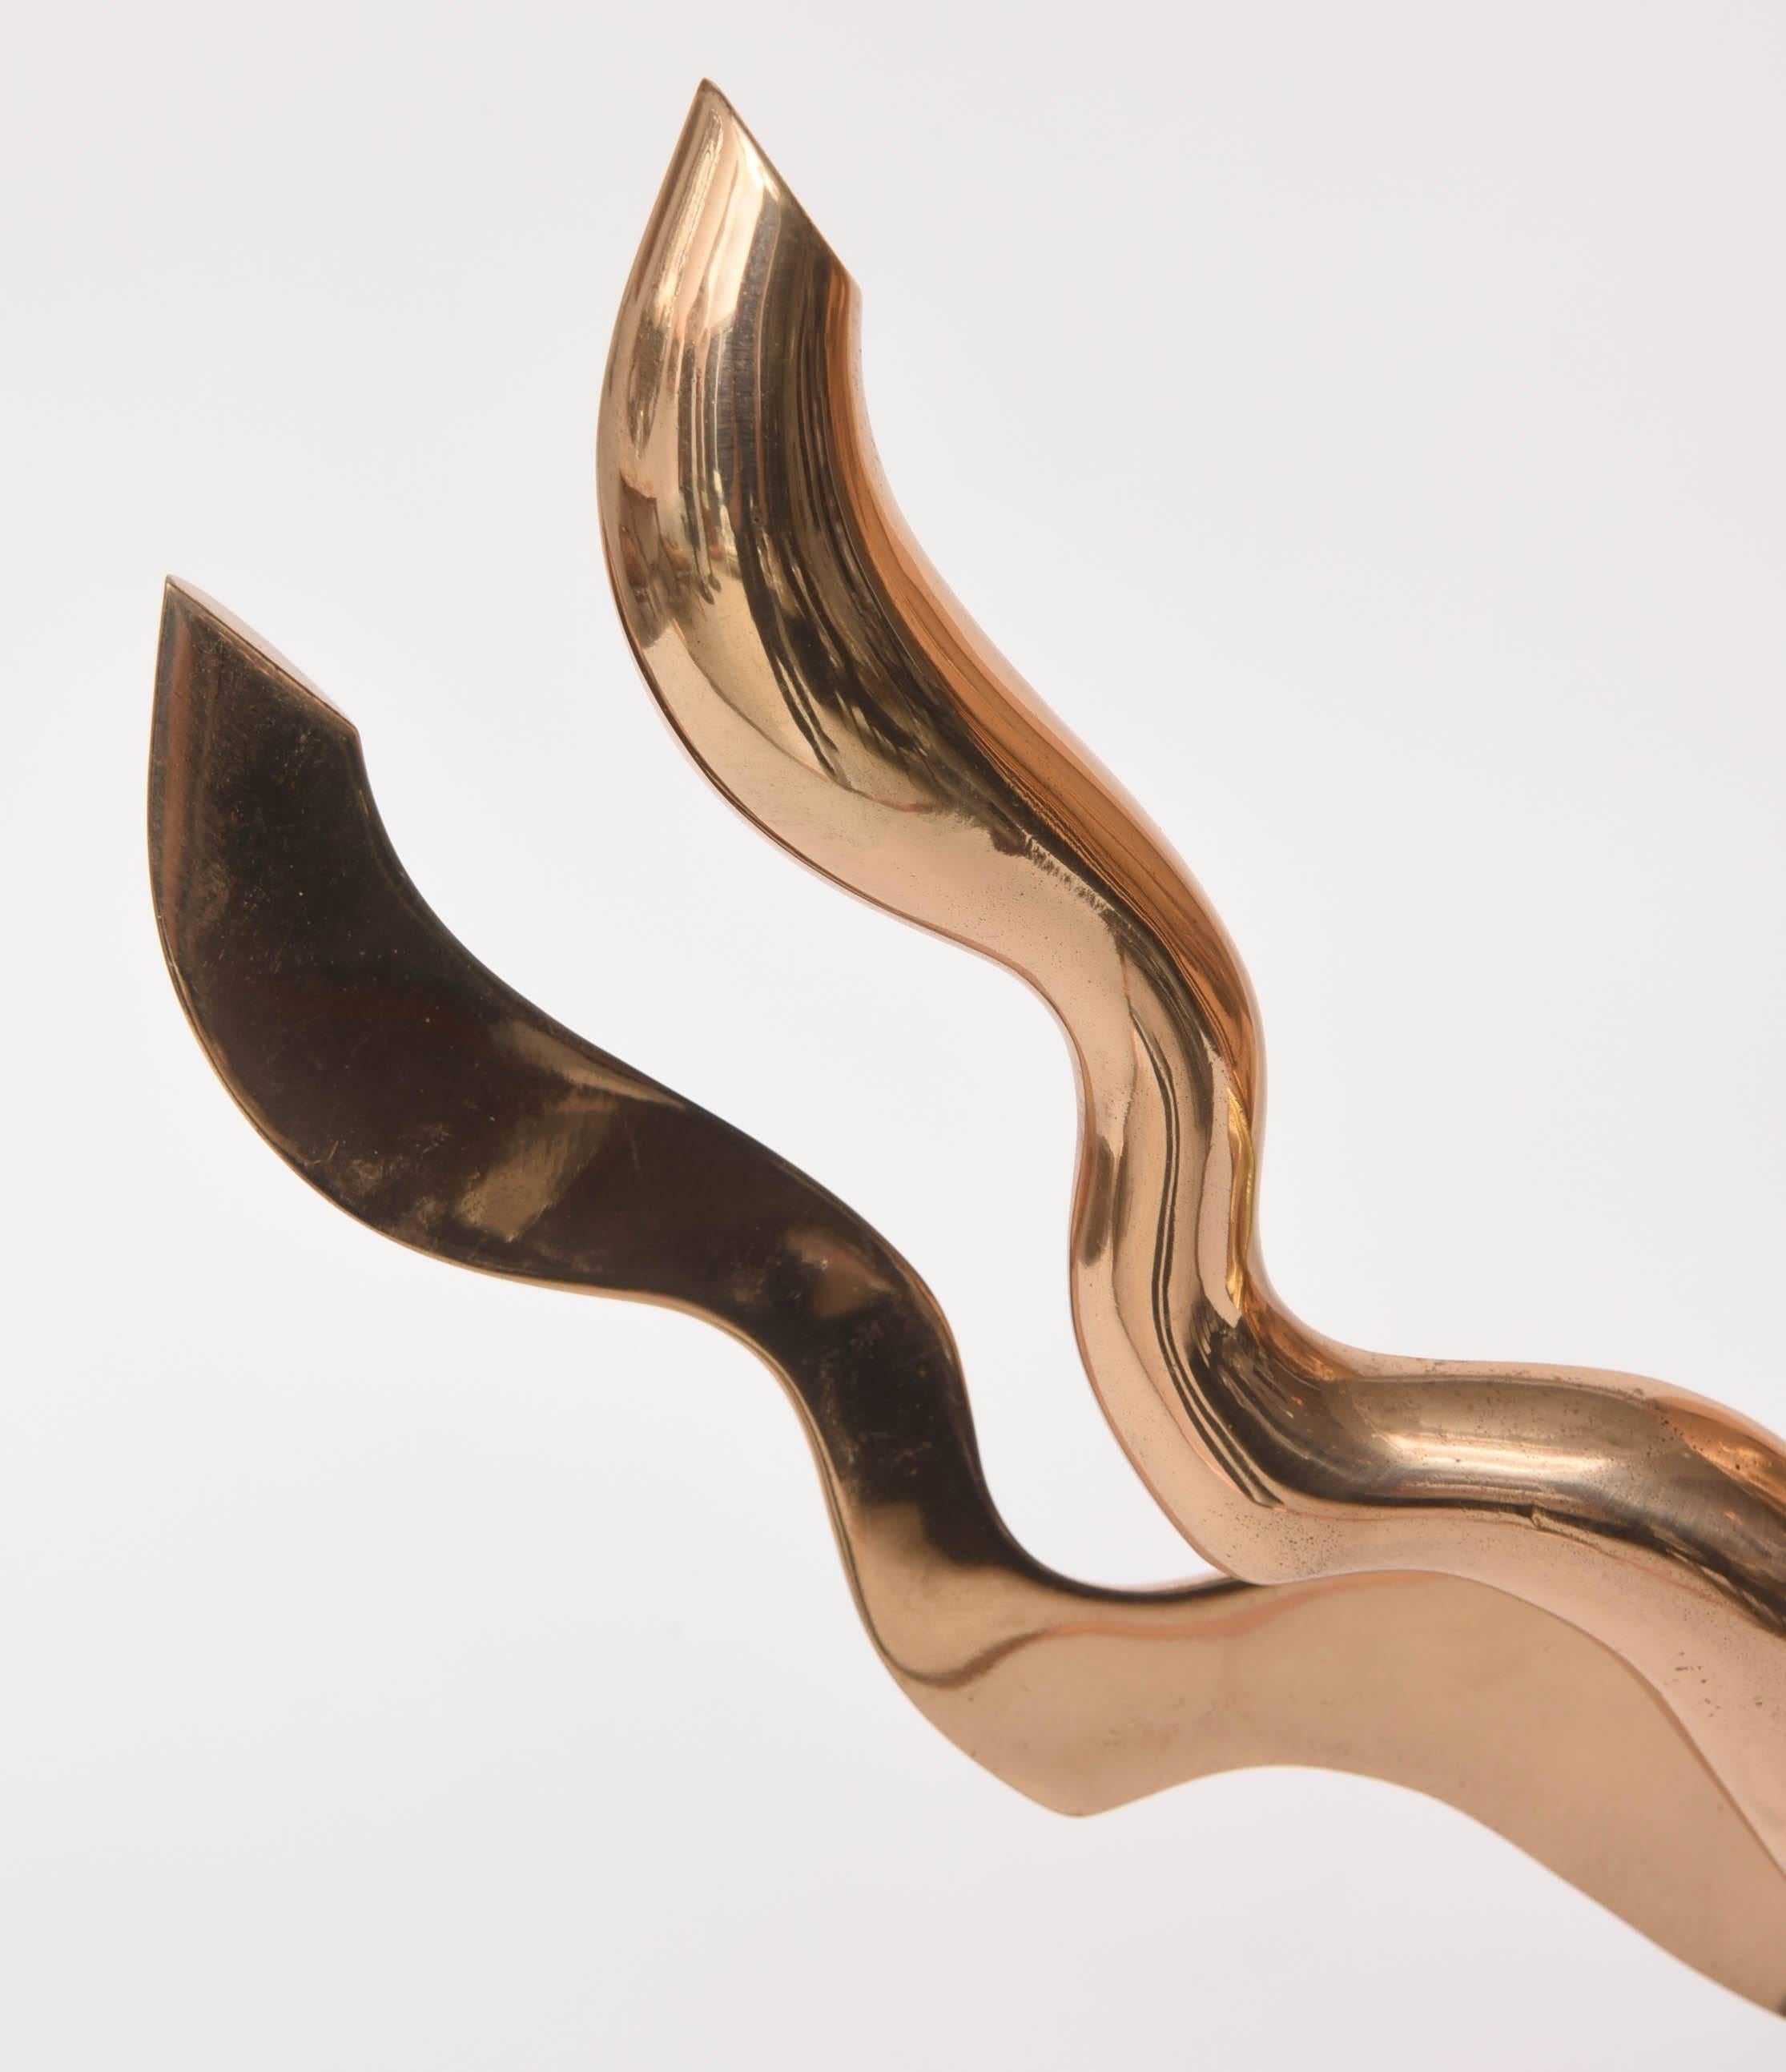 This stylish modern mixed-metal sculpture was acquired from a Palm Beach estate.

Note: The two curved-arms move and can be adjusted in-place to your liking.

Note: The piece is unsigned.

